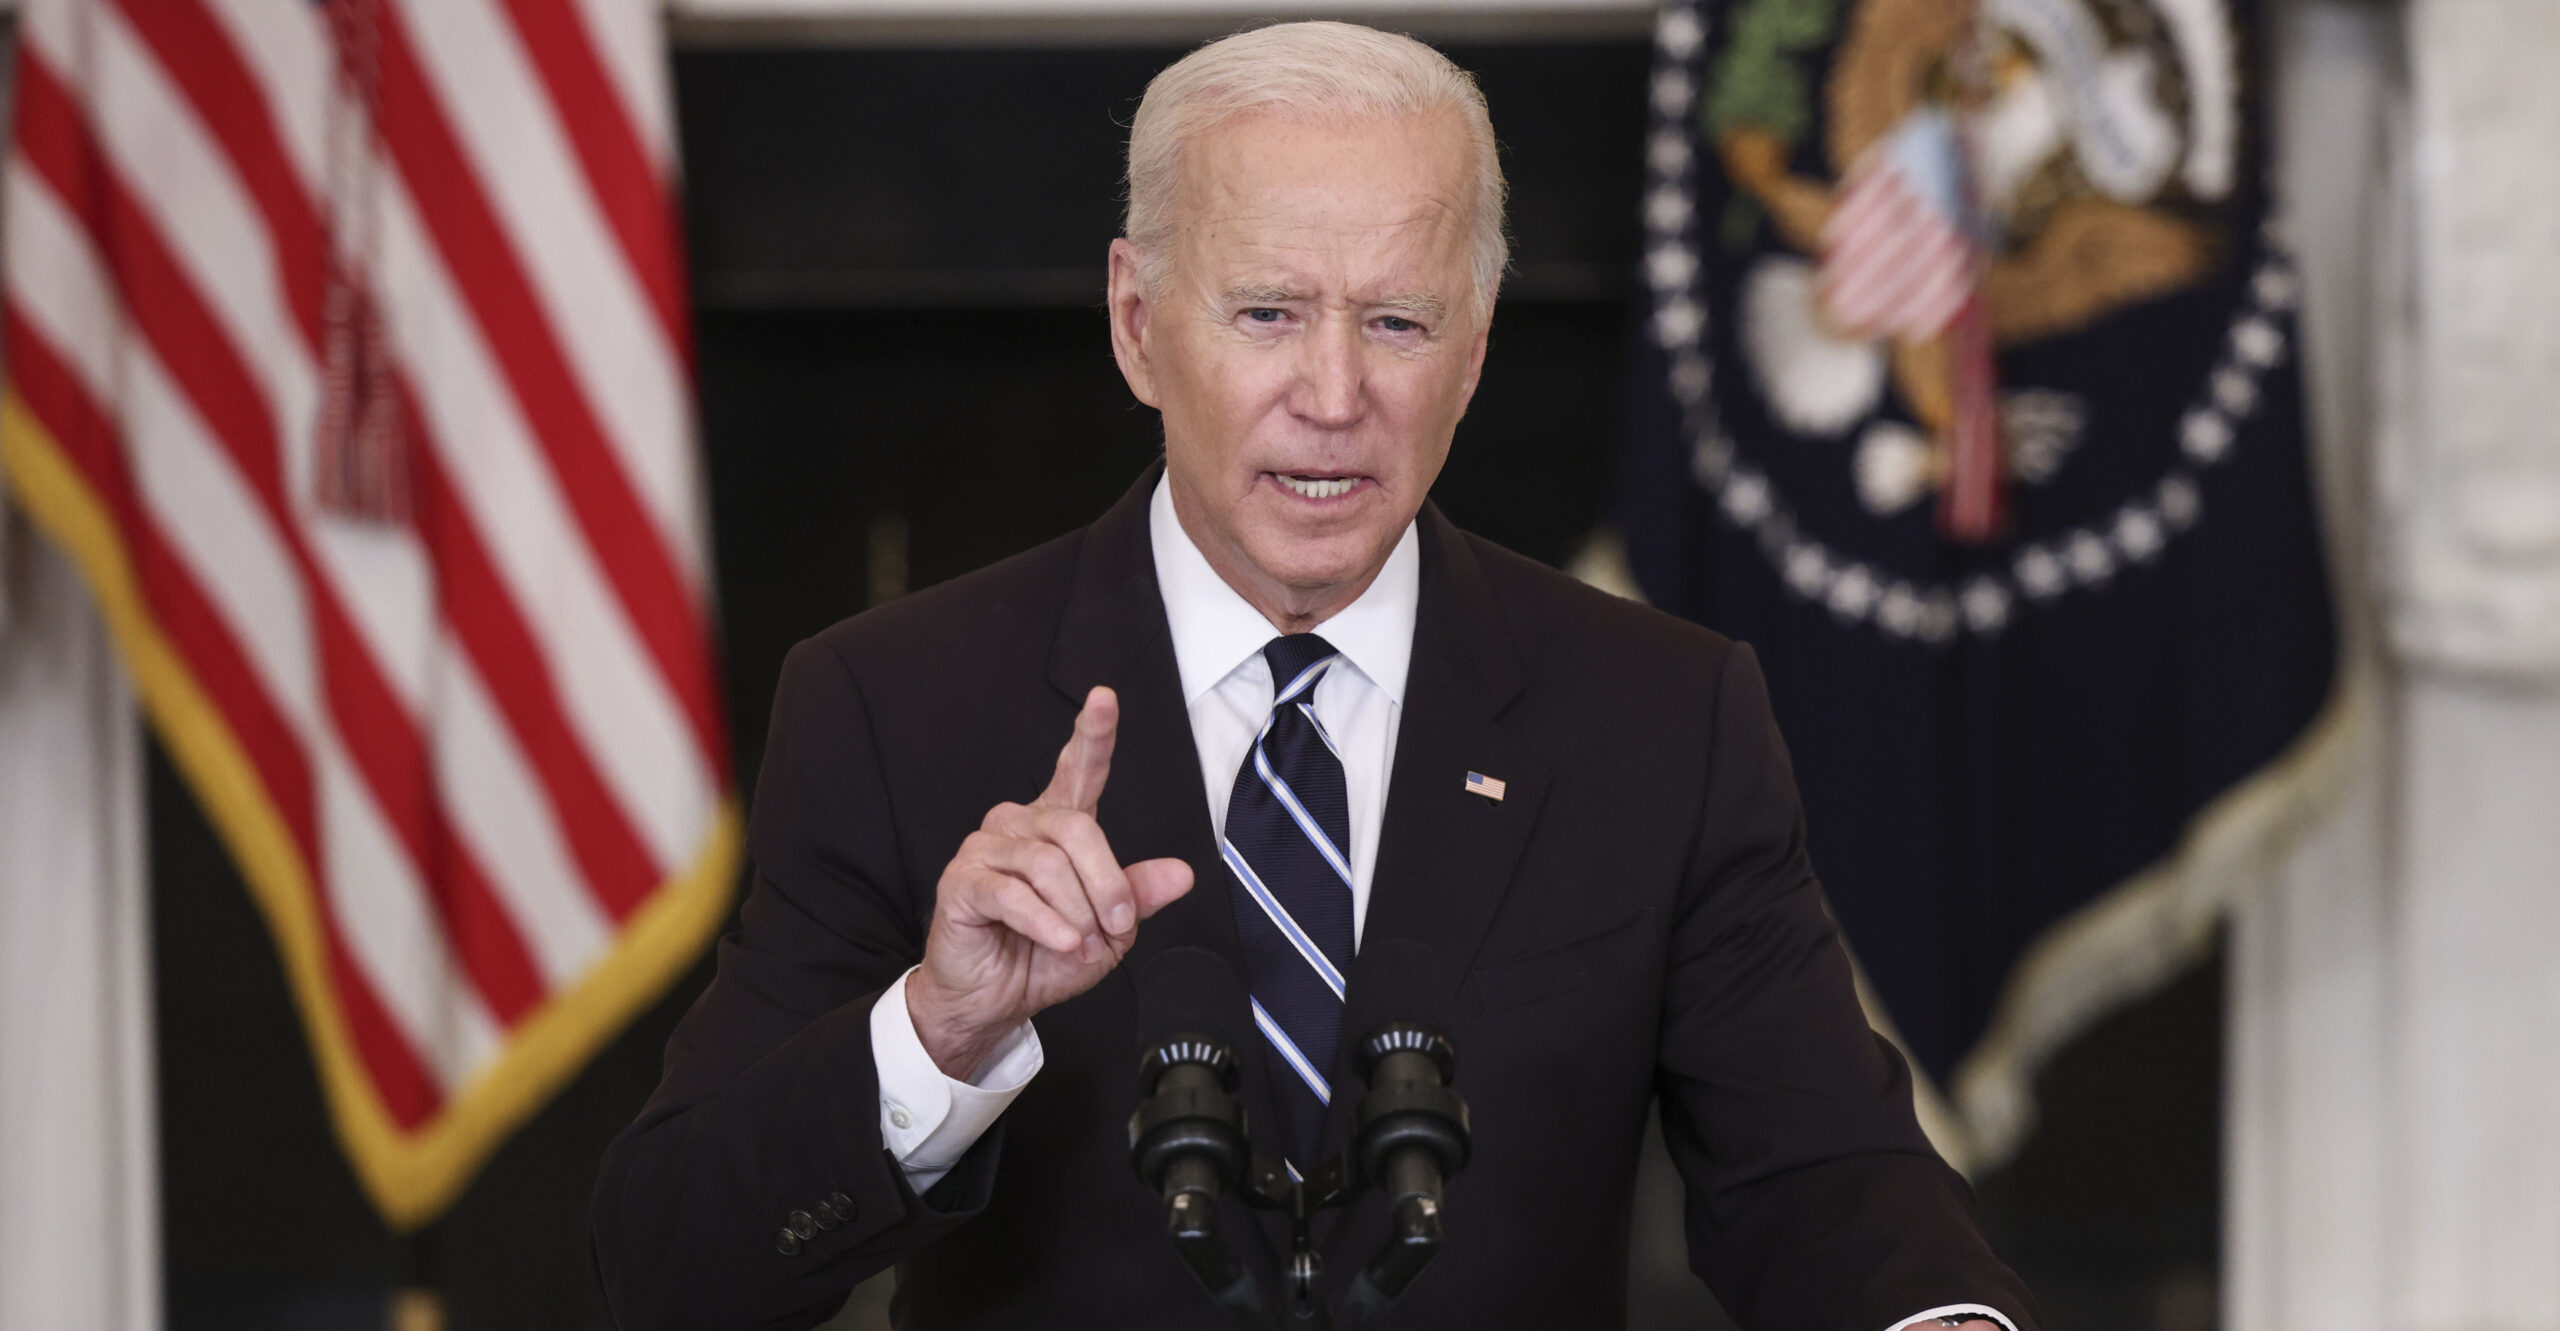 ICYMI: Biden Mandates COVID-19 Vaccines for Large Companies as Well as Federal Employees